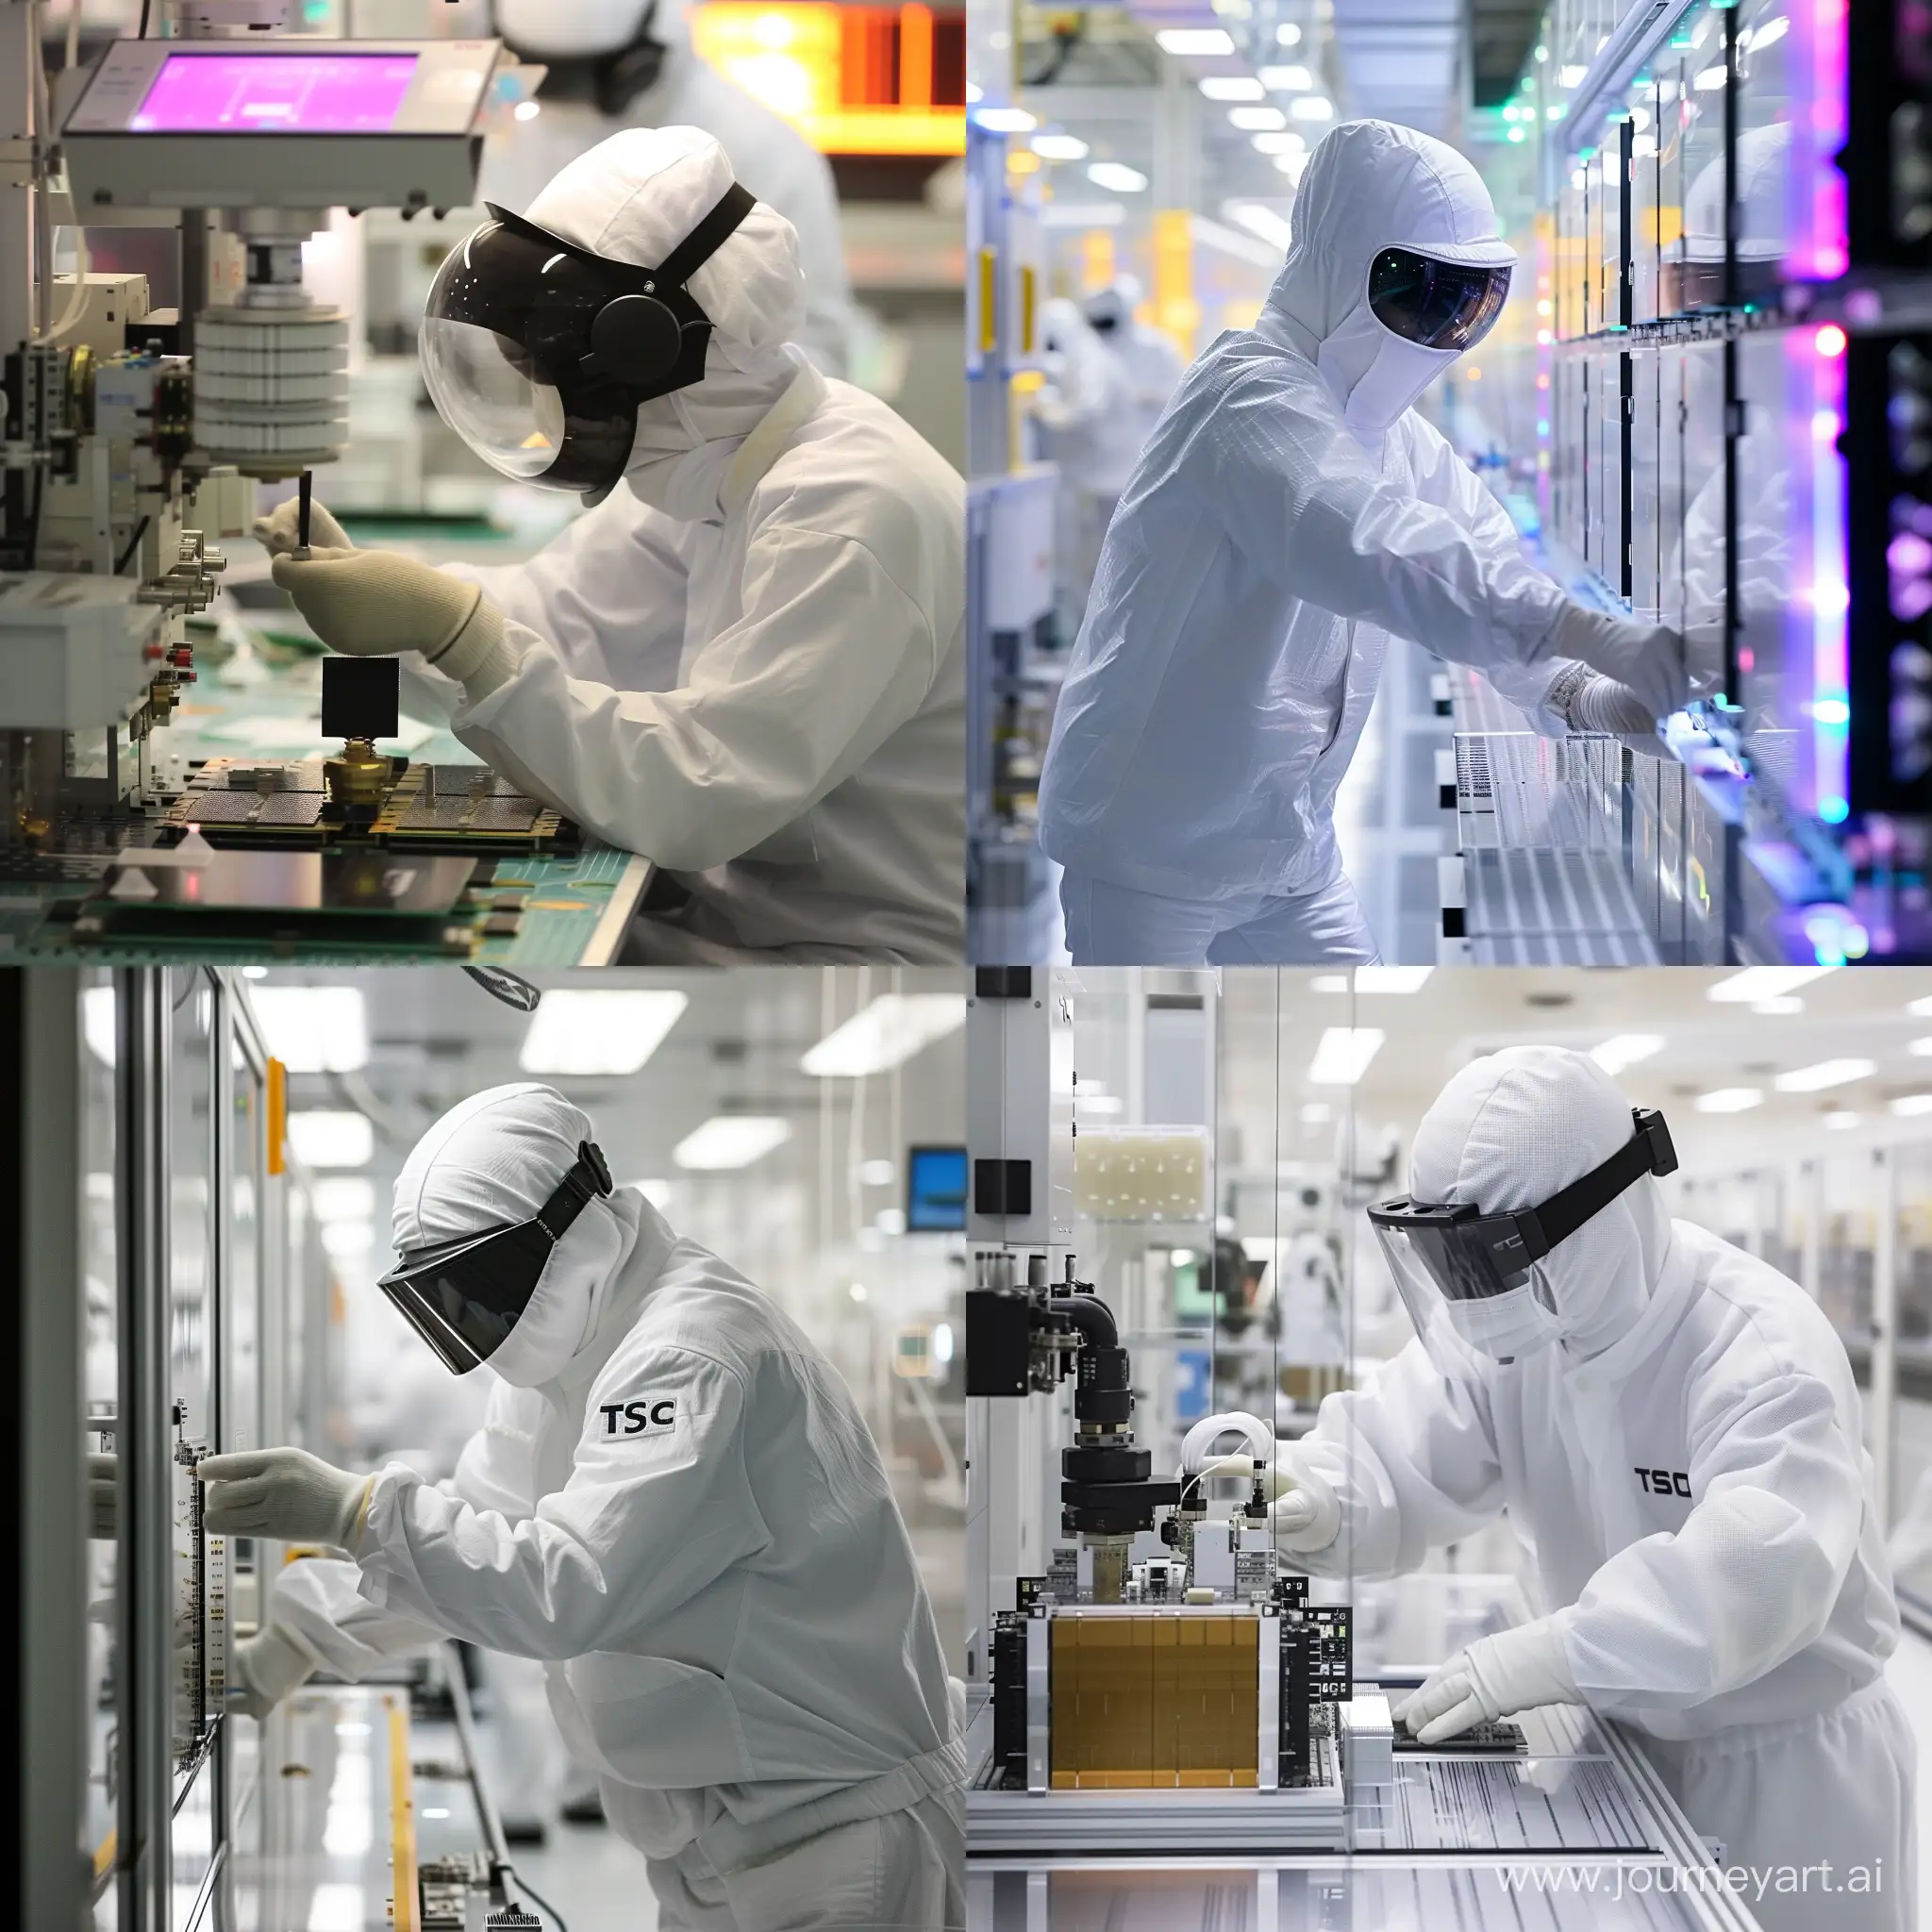 TSMCs-Expansion-in-Japan-Semiconductor-Advancement-and-Economic-Growth